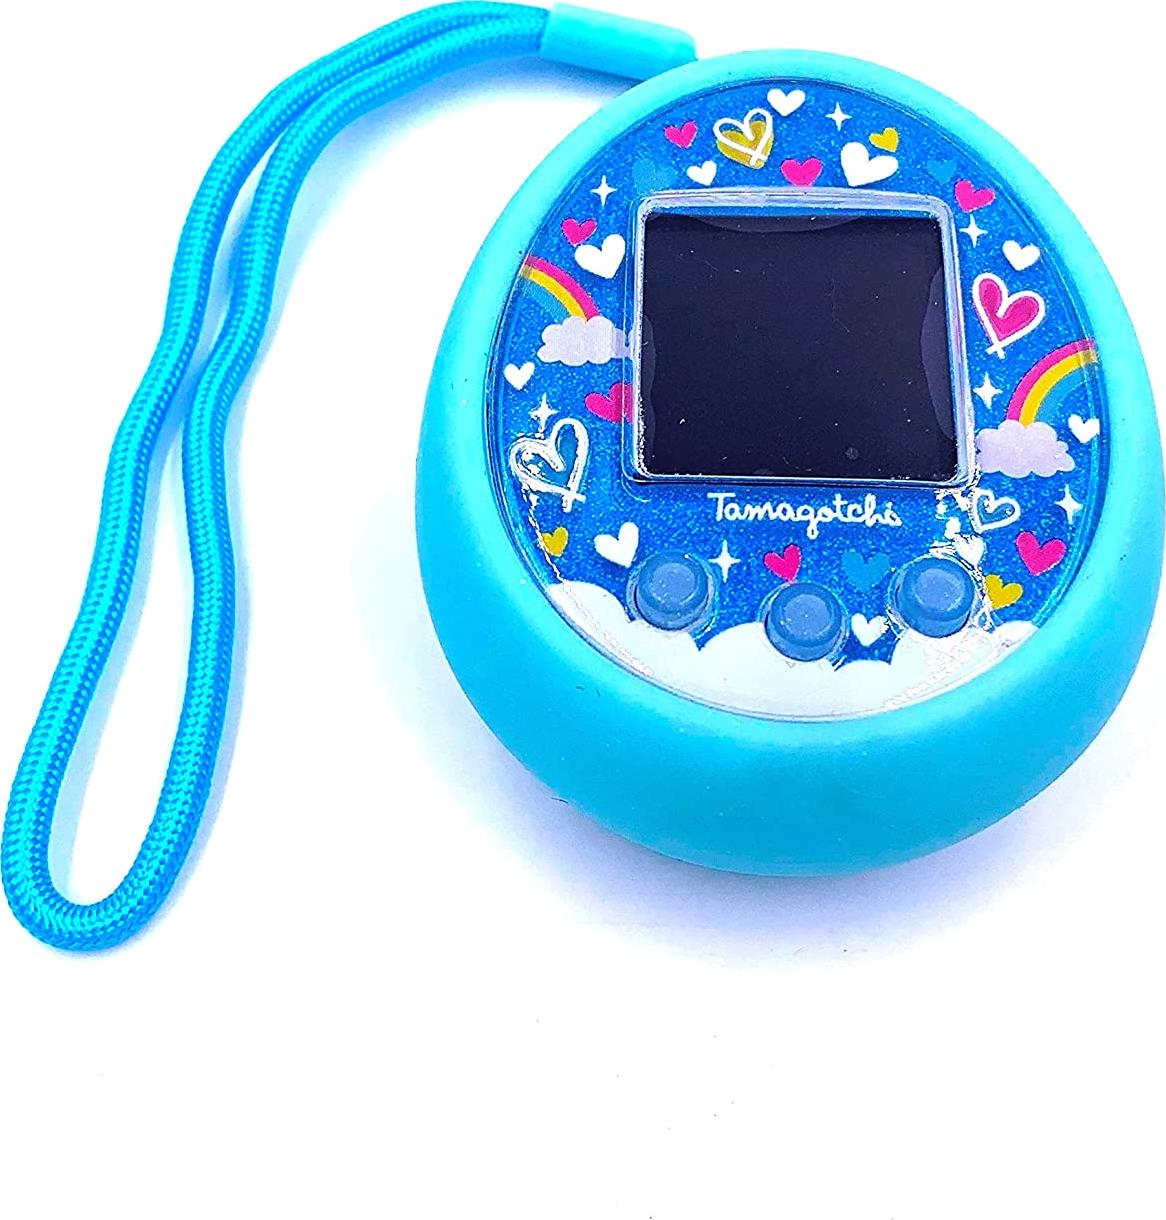 LeoTube, LeoTube Silicone Shell Cover for Tamagotchi on Interactive Pet Machine, Compatible Tamagotchi on Silicone Protective Case Skin (Blue)